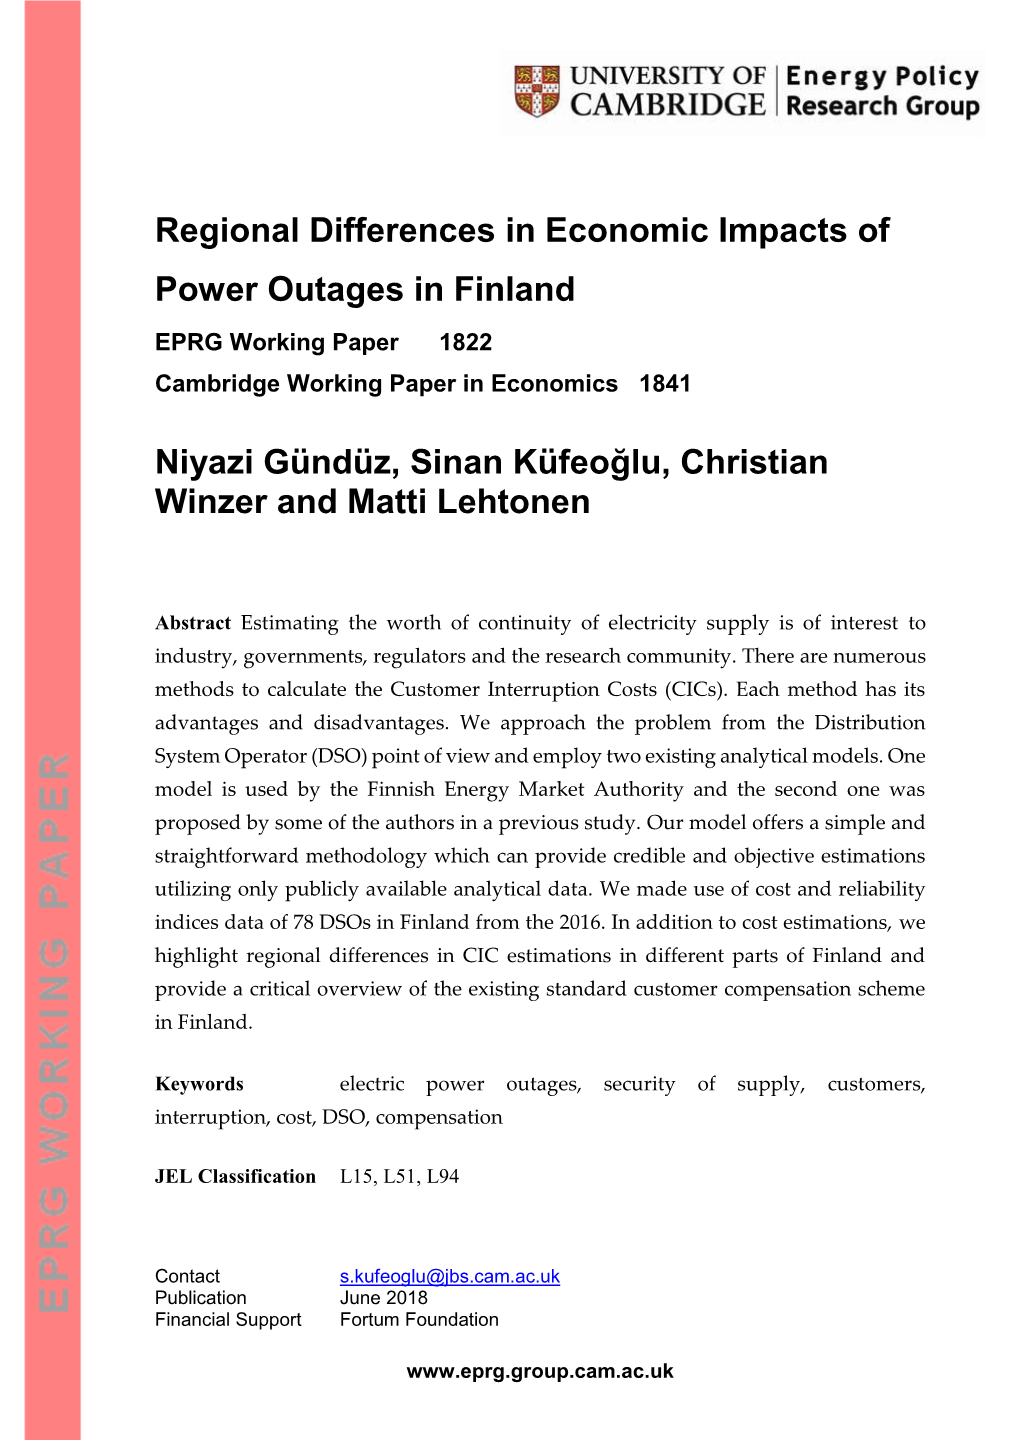 Regional Differences in Economic Impacts of Power Outages in Finland